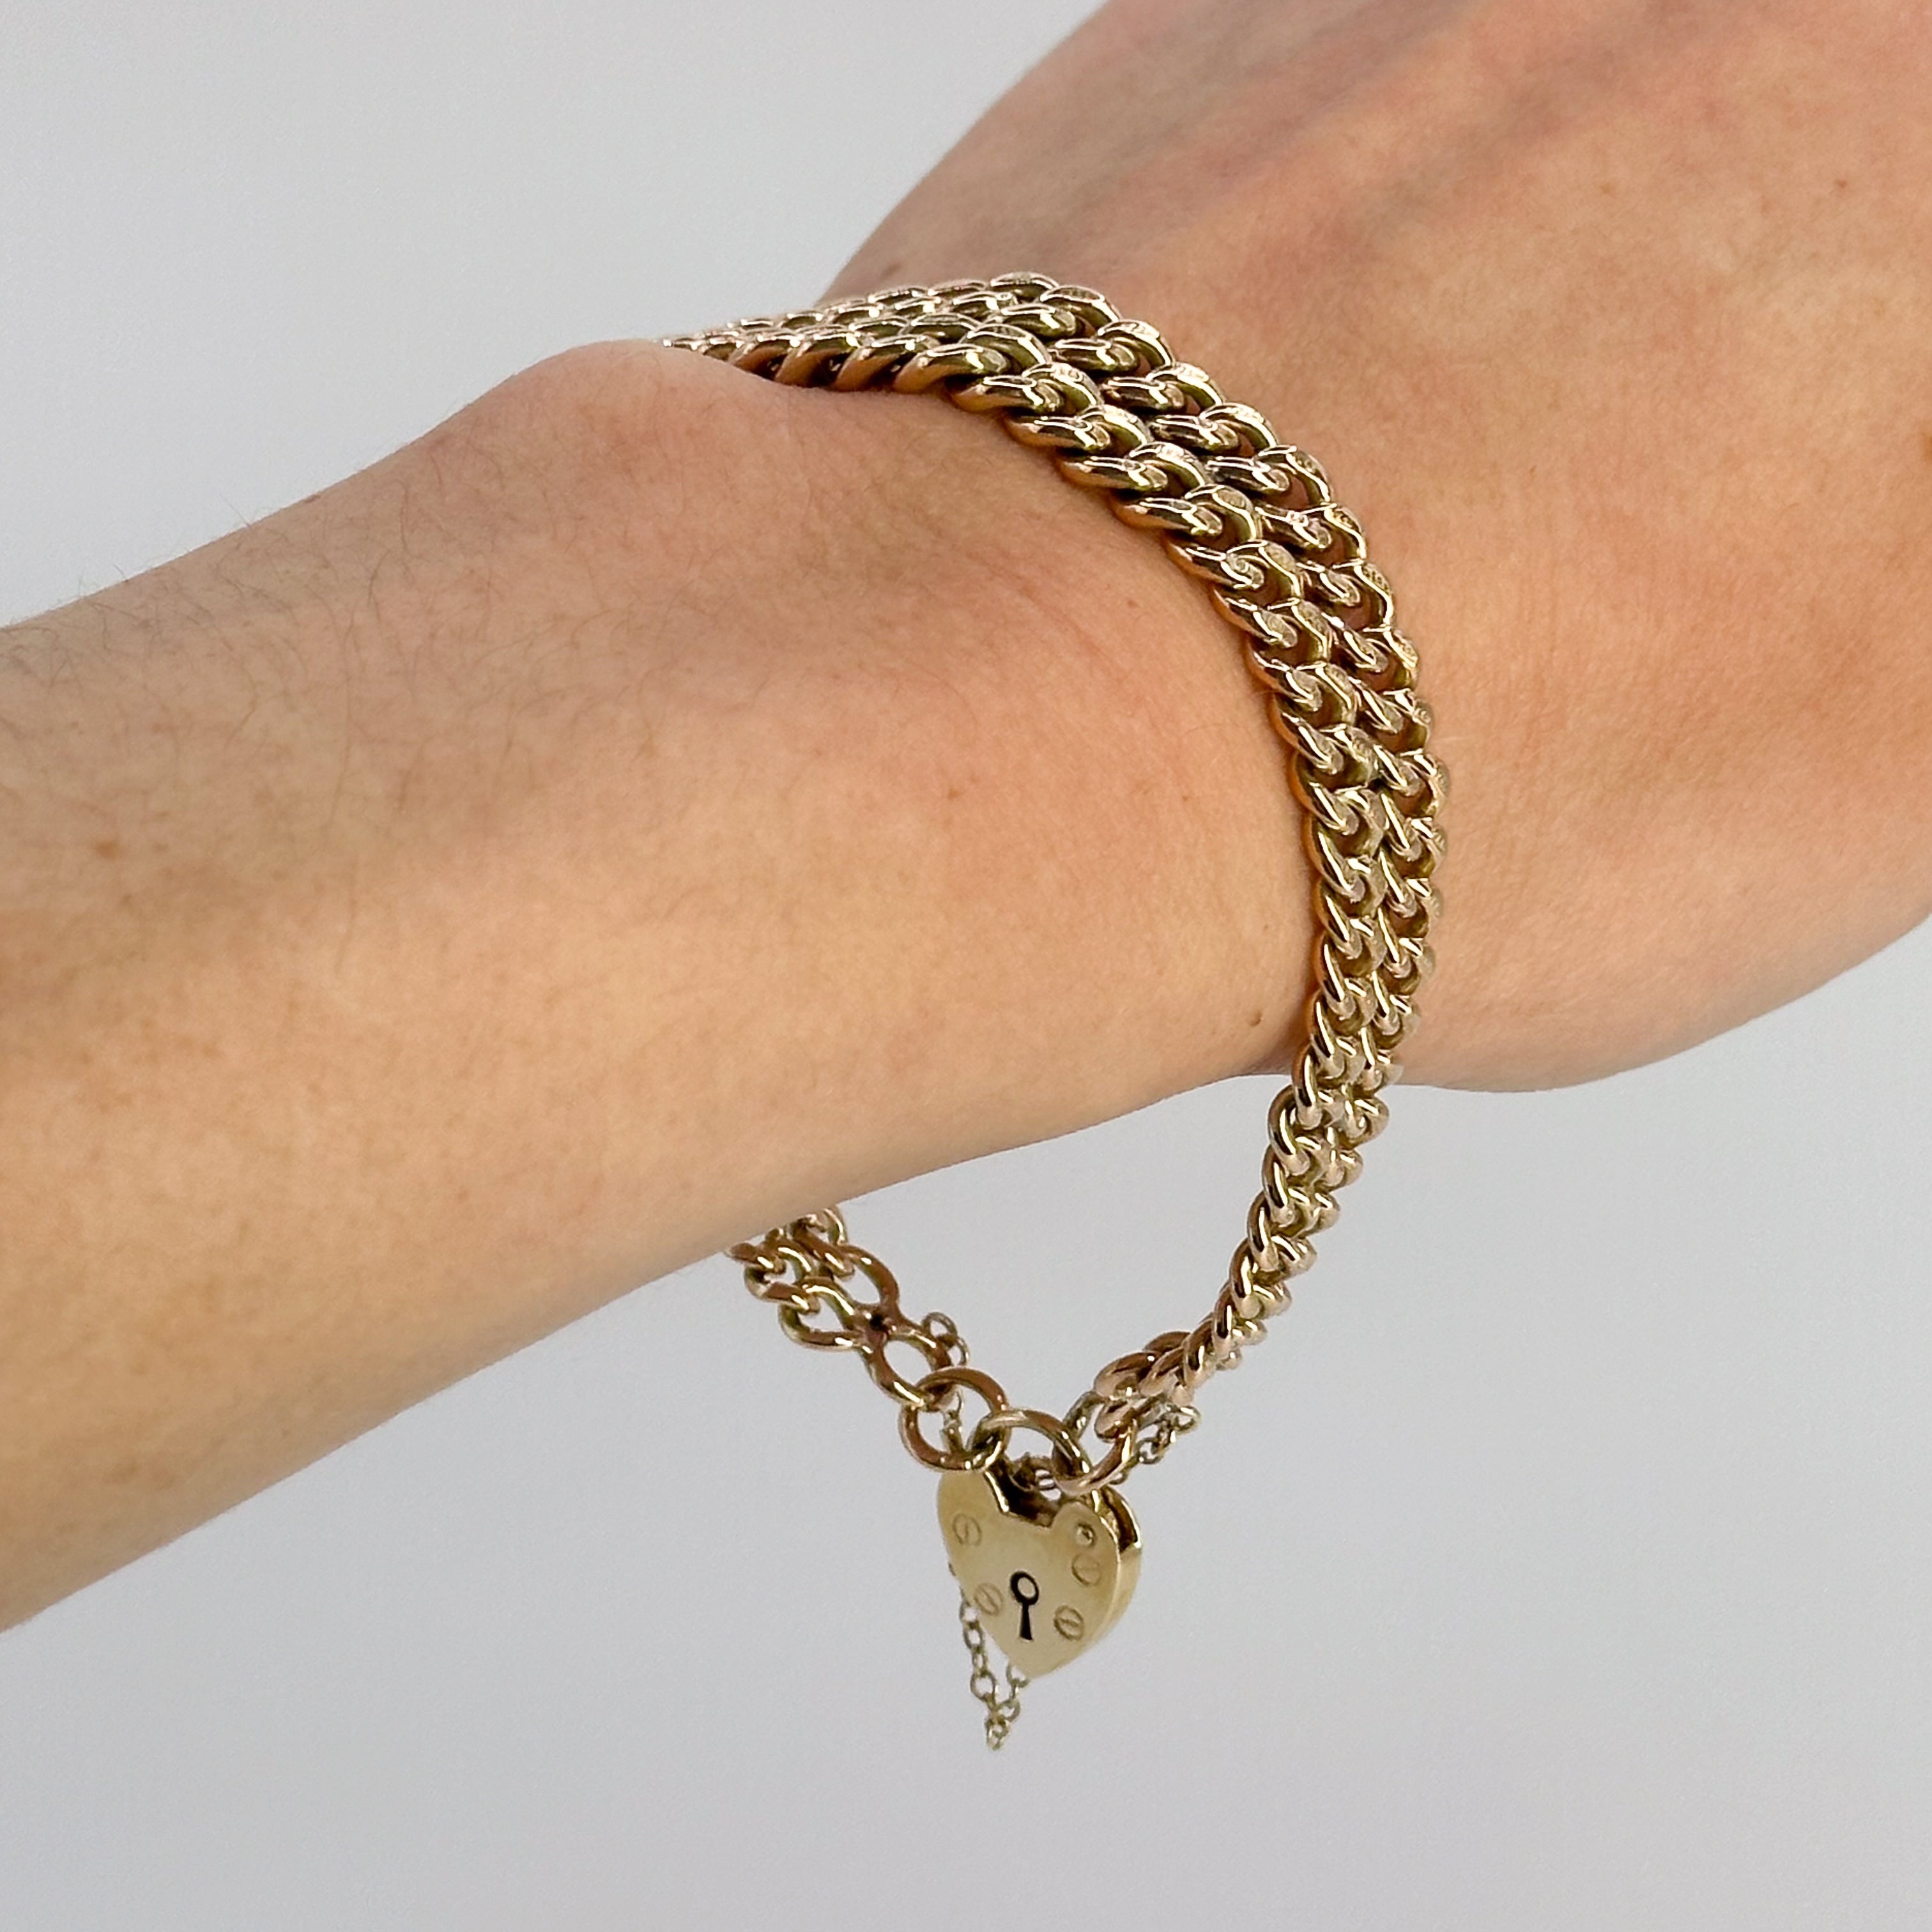 Chain Bracelet with Heart Clasp